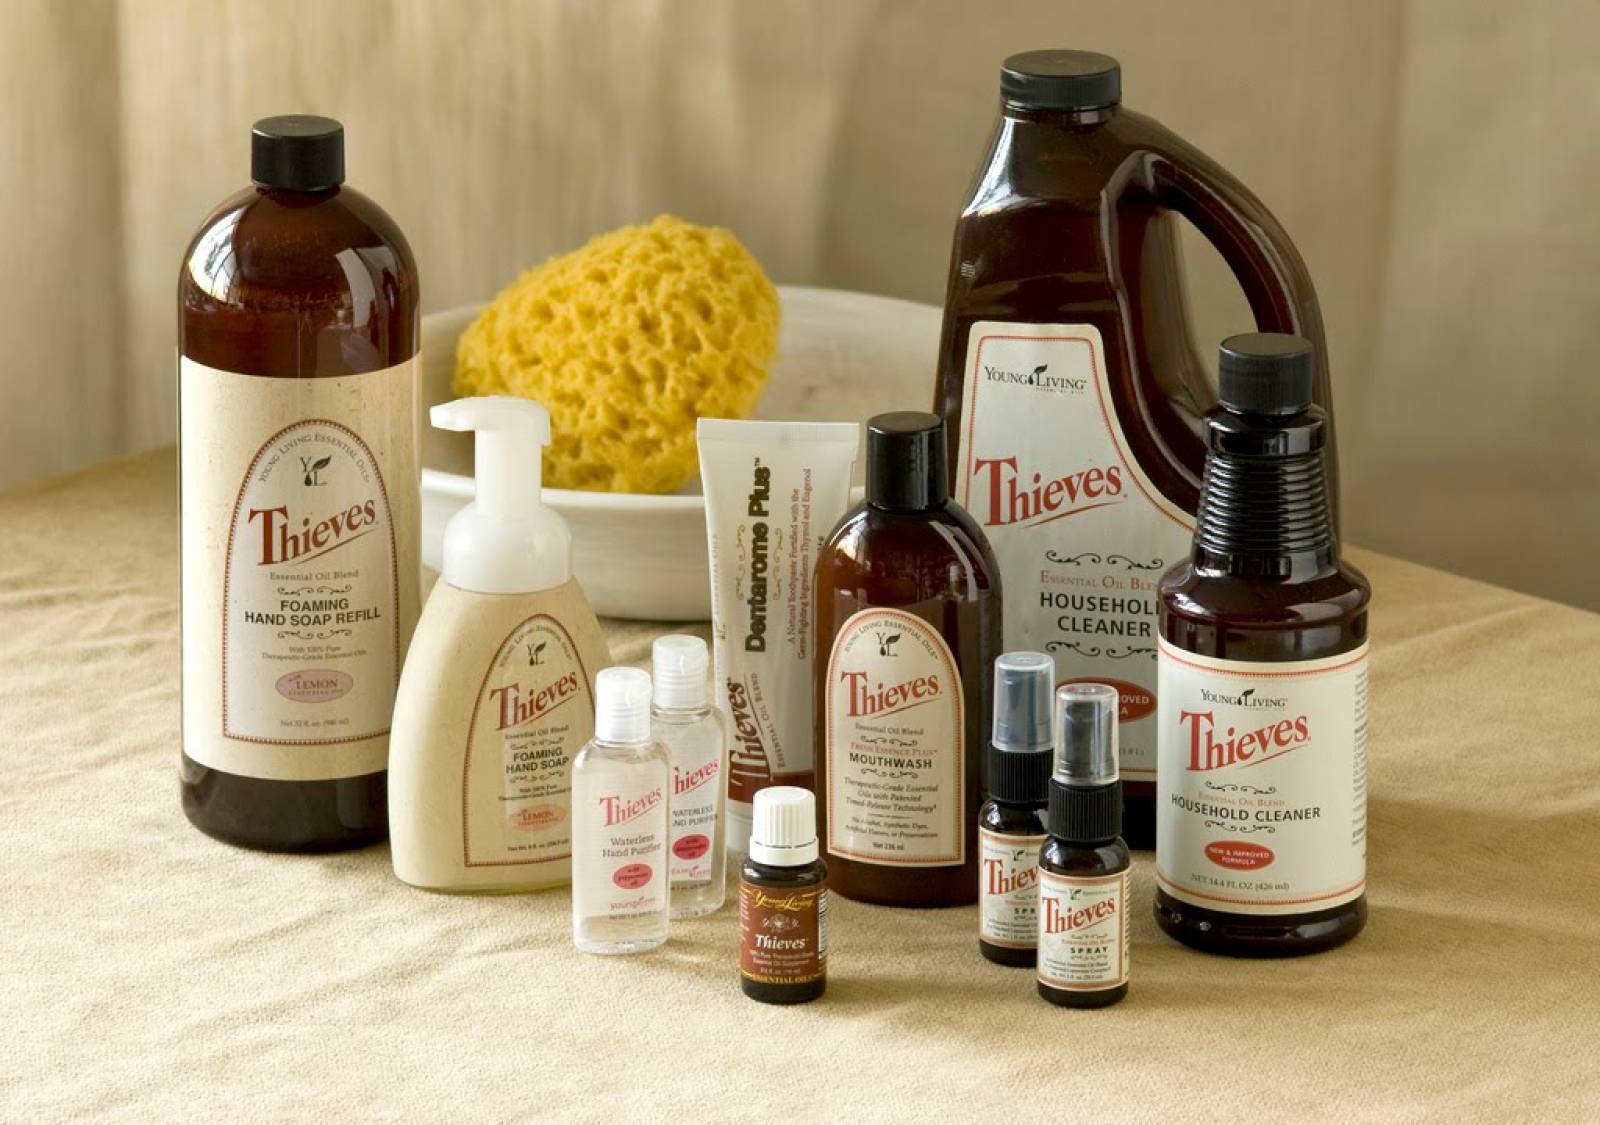 Economical and Toxin Free Living, Featuring the Young Living Thieves Line